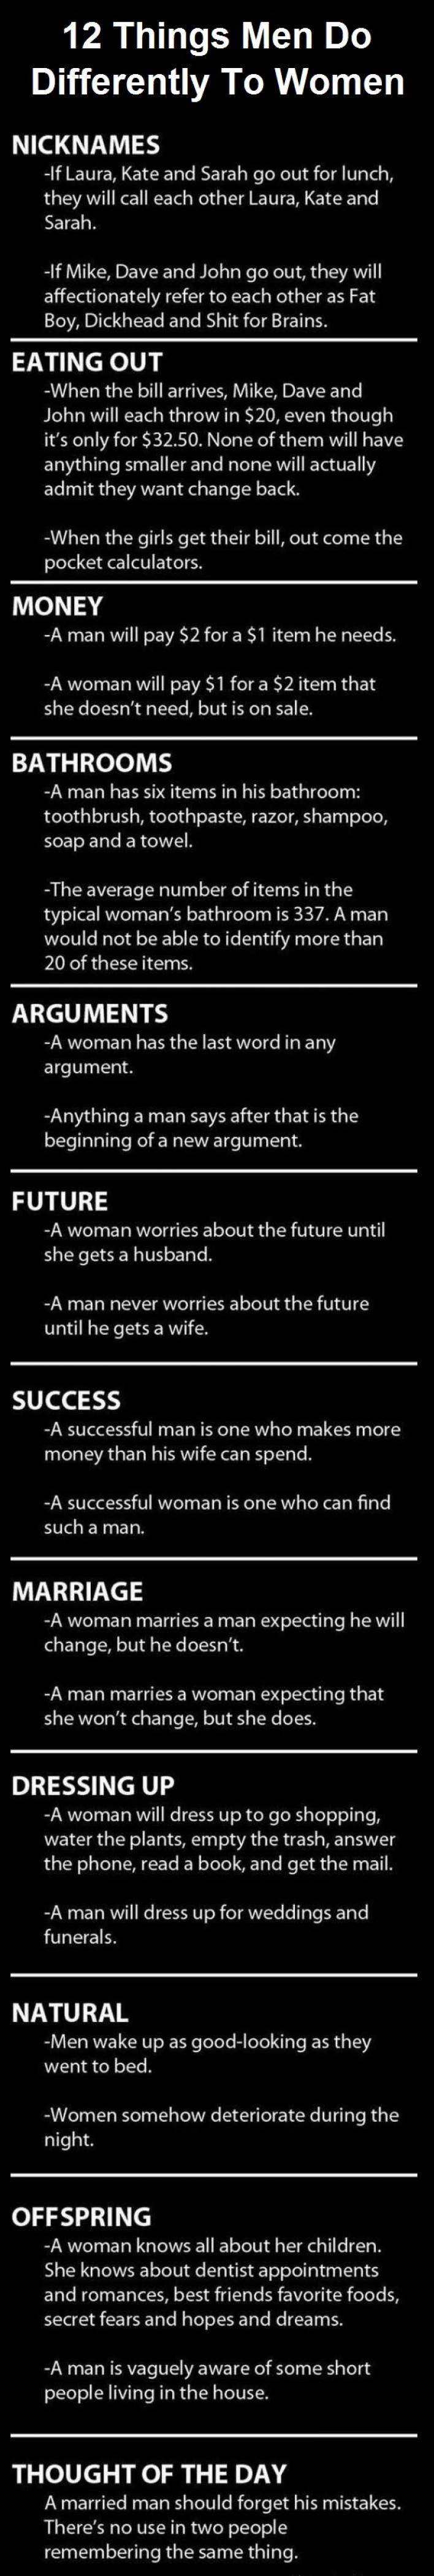 12 things men do differently than women.